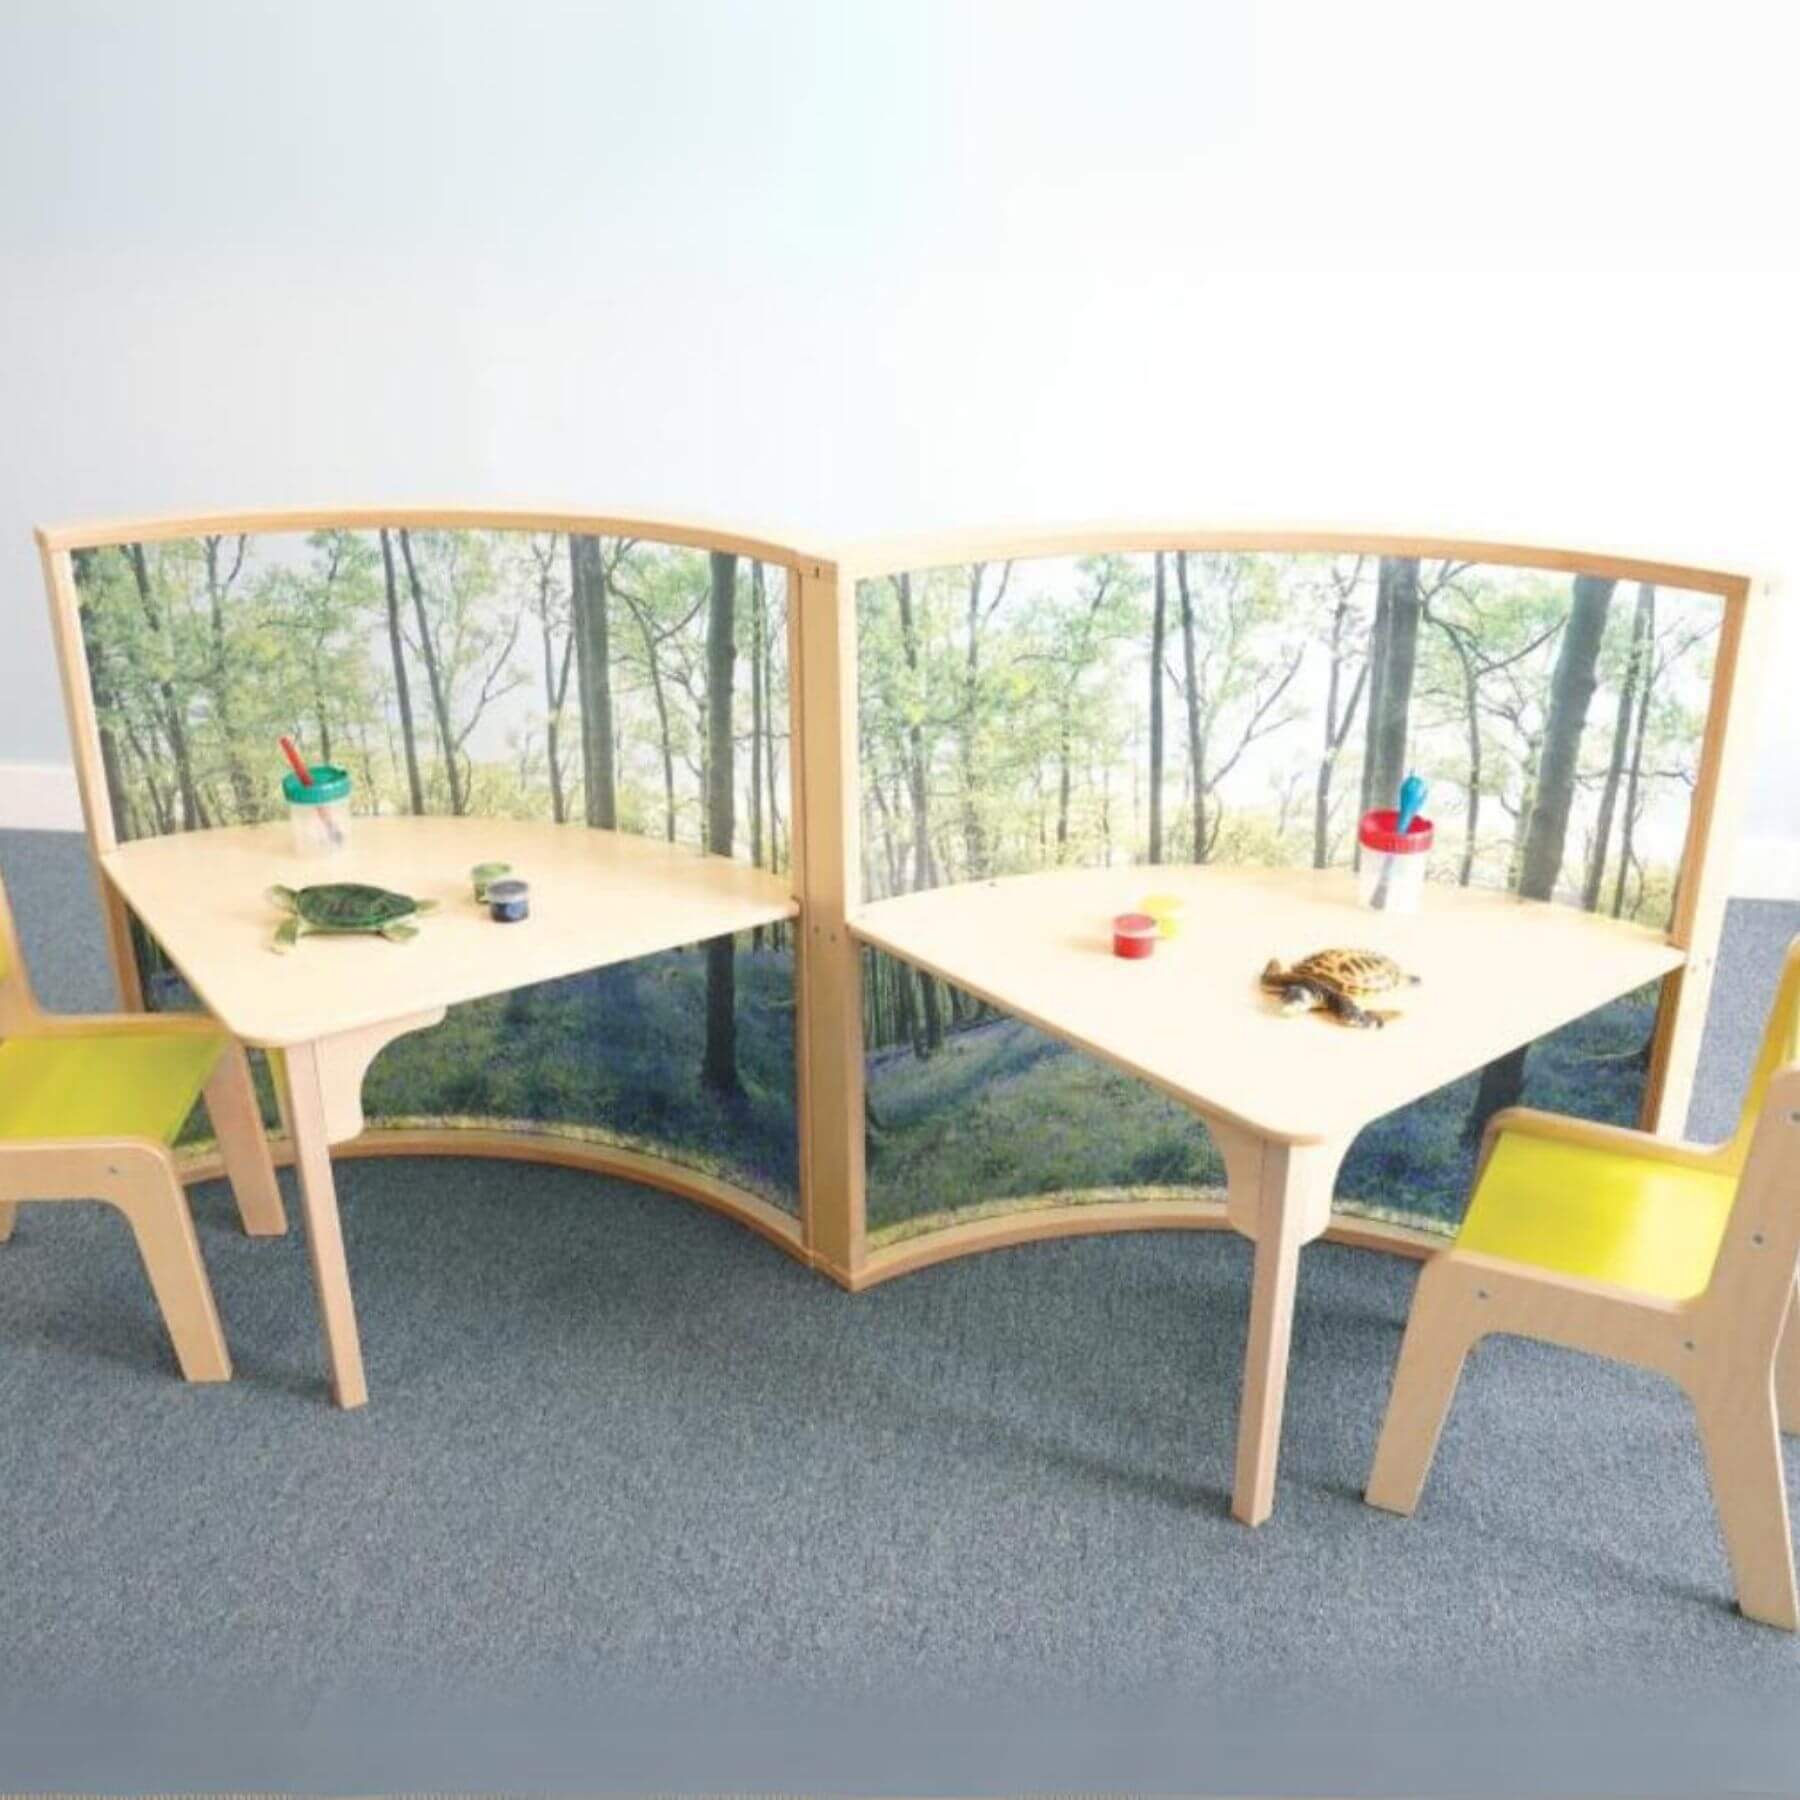 2 Whitney Brothers Nature View Serenity Pod with 2 Chairs